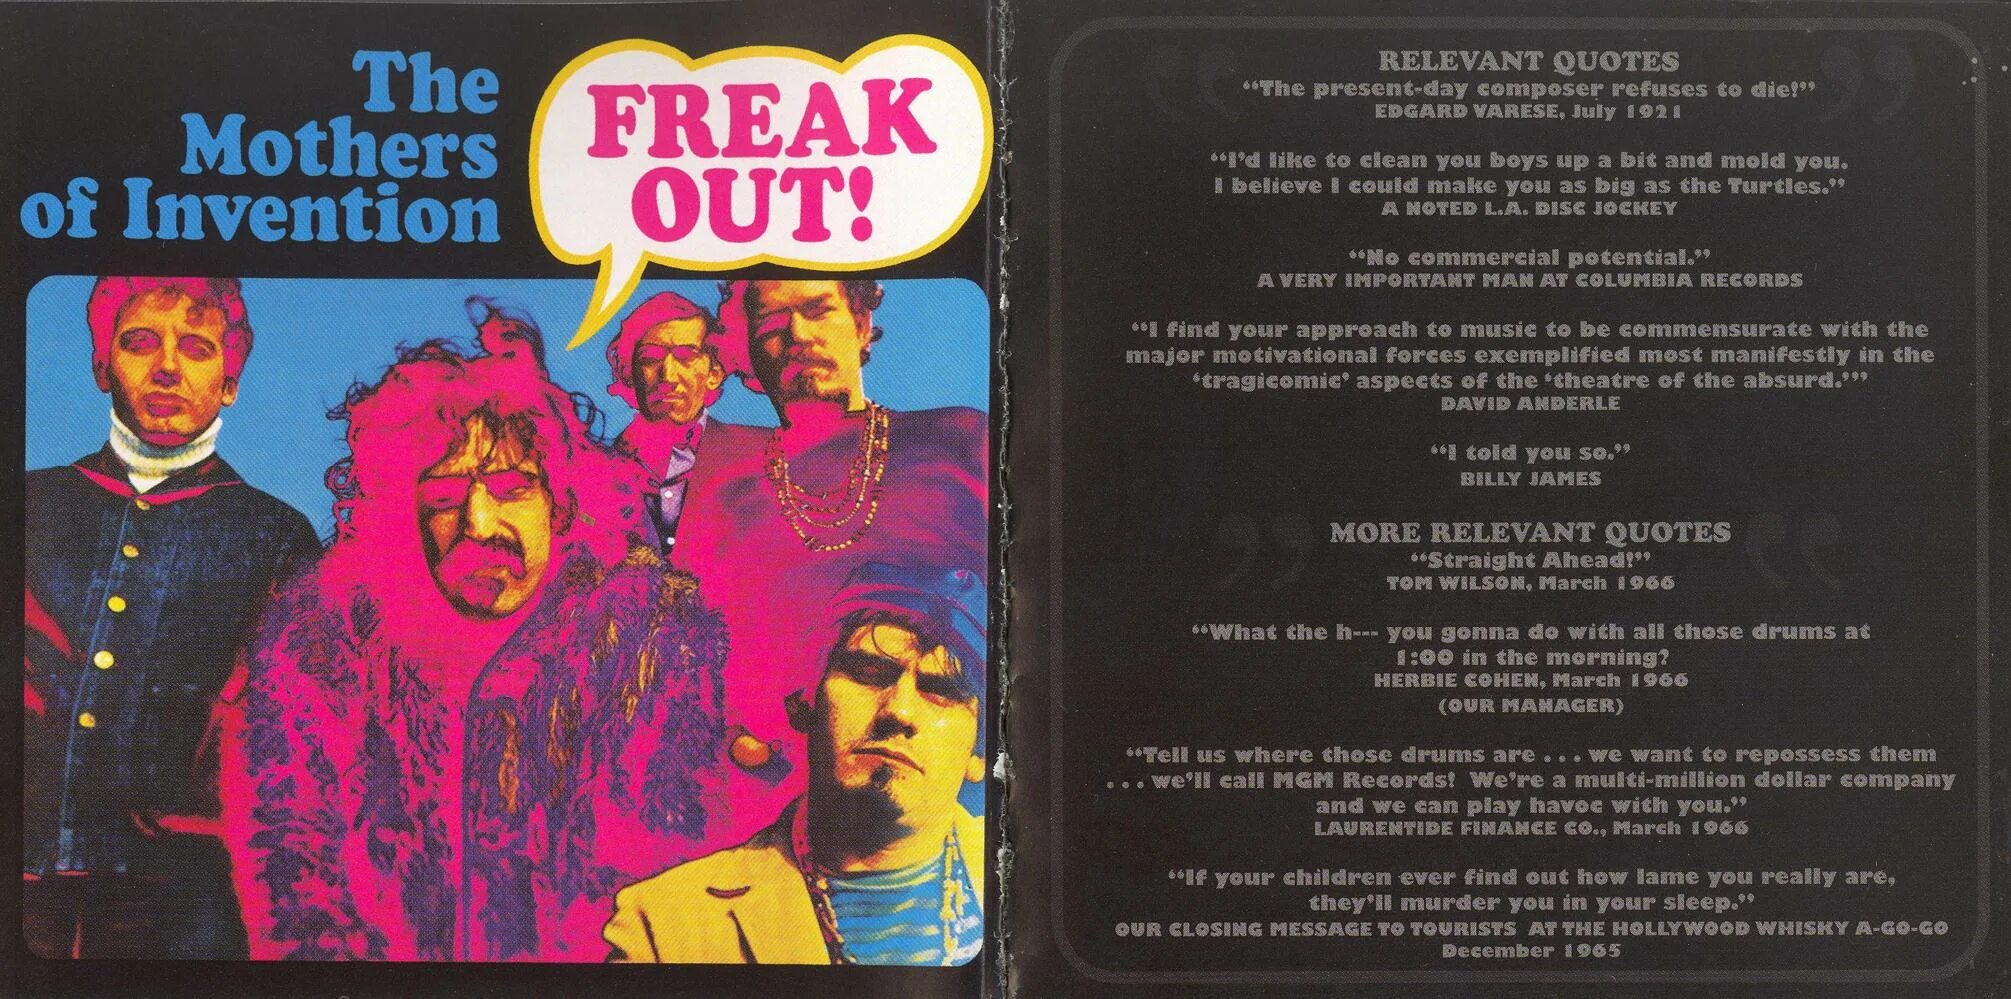 Freaks перевод на русский. Frank Zappa Freak out. Frank Zappa Freak out LP. Freak out! The mothers of Invention. Альбом Freak out! (1966).